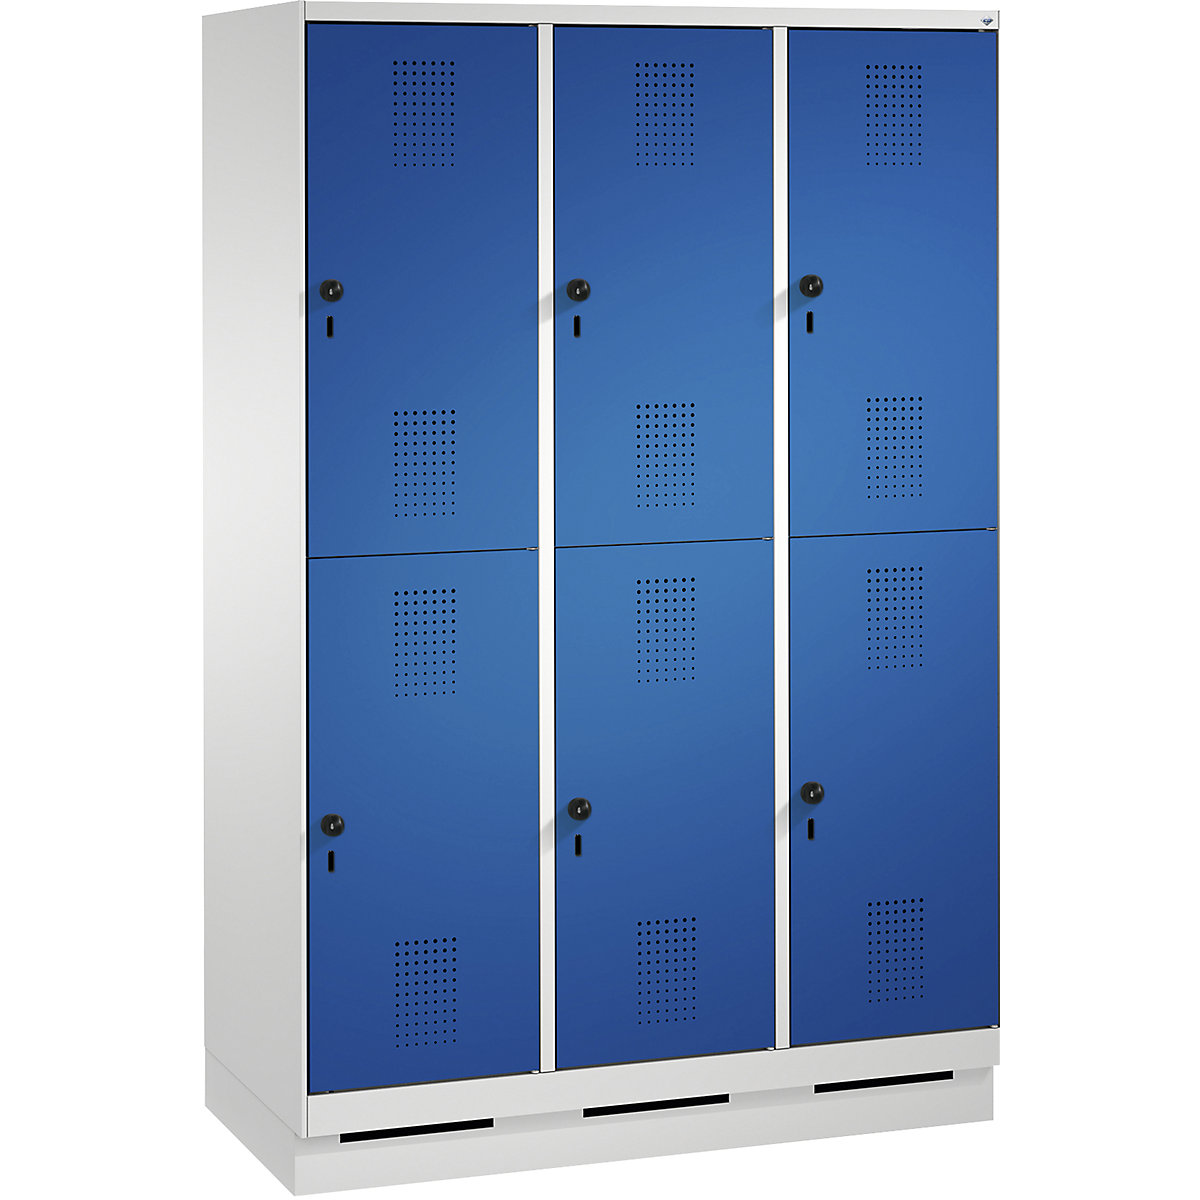 EVOLO cloakroom locker, double tier, with plinth – C+P, 3 compartments, 2 shelf compartments each, compartment width 400 mm, light grey / gentian blue-7